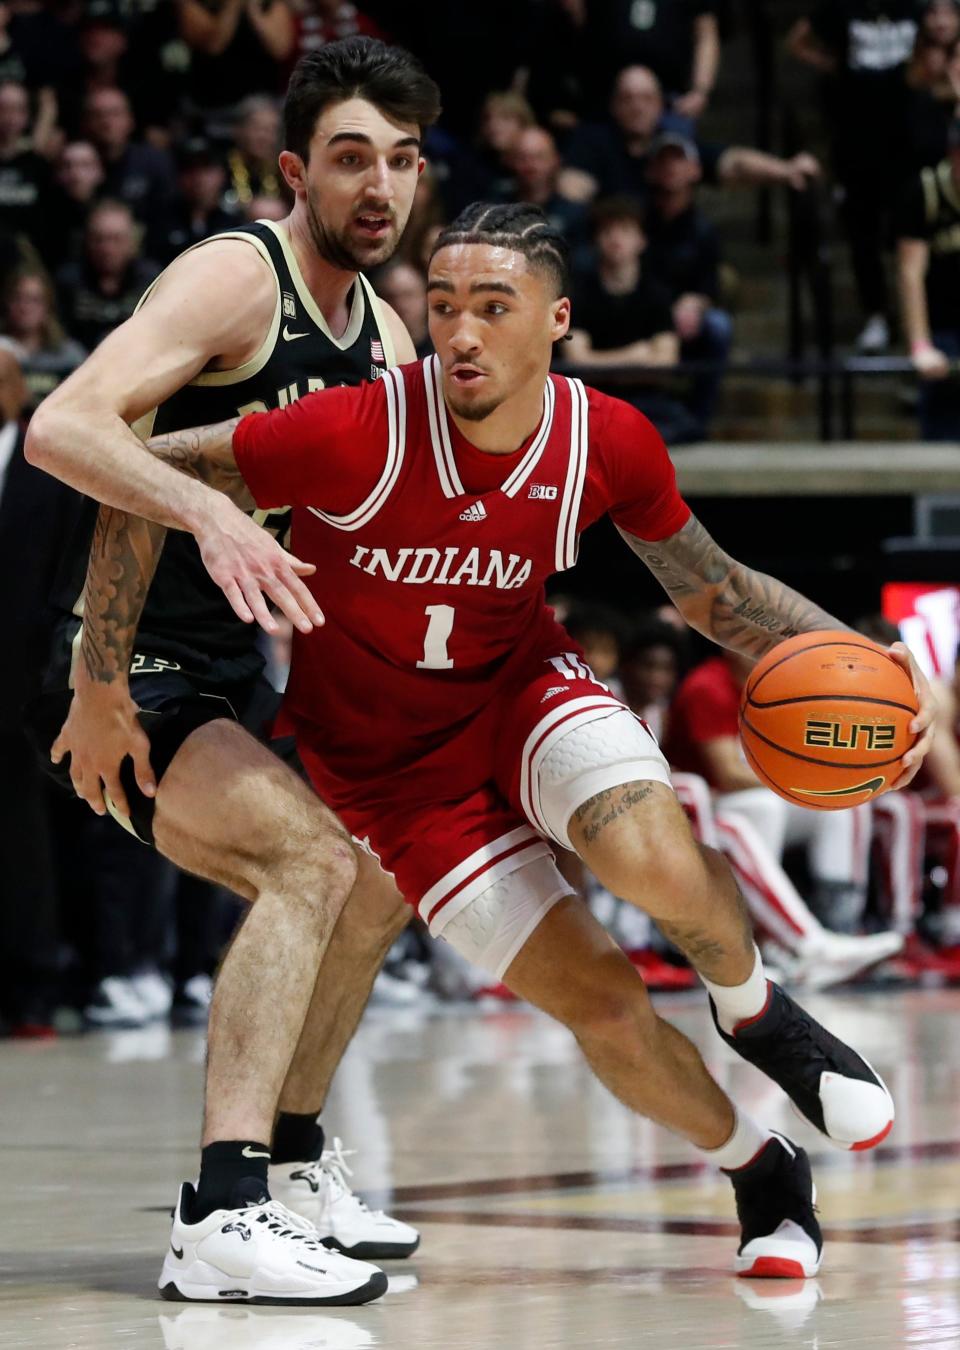 Purdue Boilermakers guard Ethan Morton (25) defends Indiana Hoosiers guard Jalen Hood-Schifino (1) during the NCAA menâ€™s basketball game, Saturday, Feb. 25, 2023, at Mackey Arena in West Lafayette, Ind.